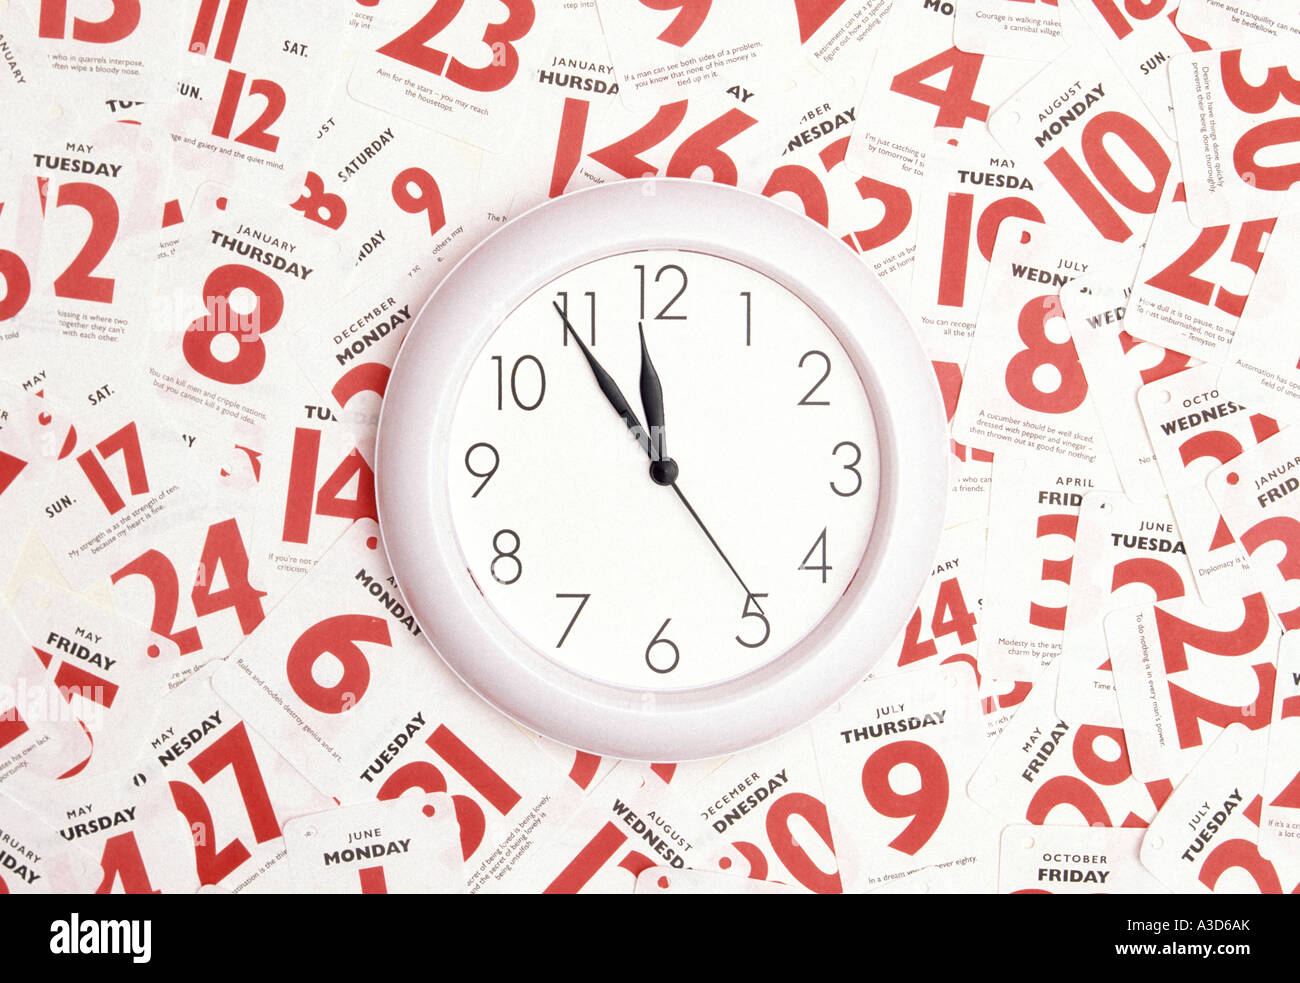 Time date calendar appointment conceptual image using clock face & red dates of week month & year as concept for people who try to manage a busy life Stock Photo